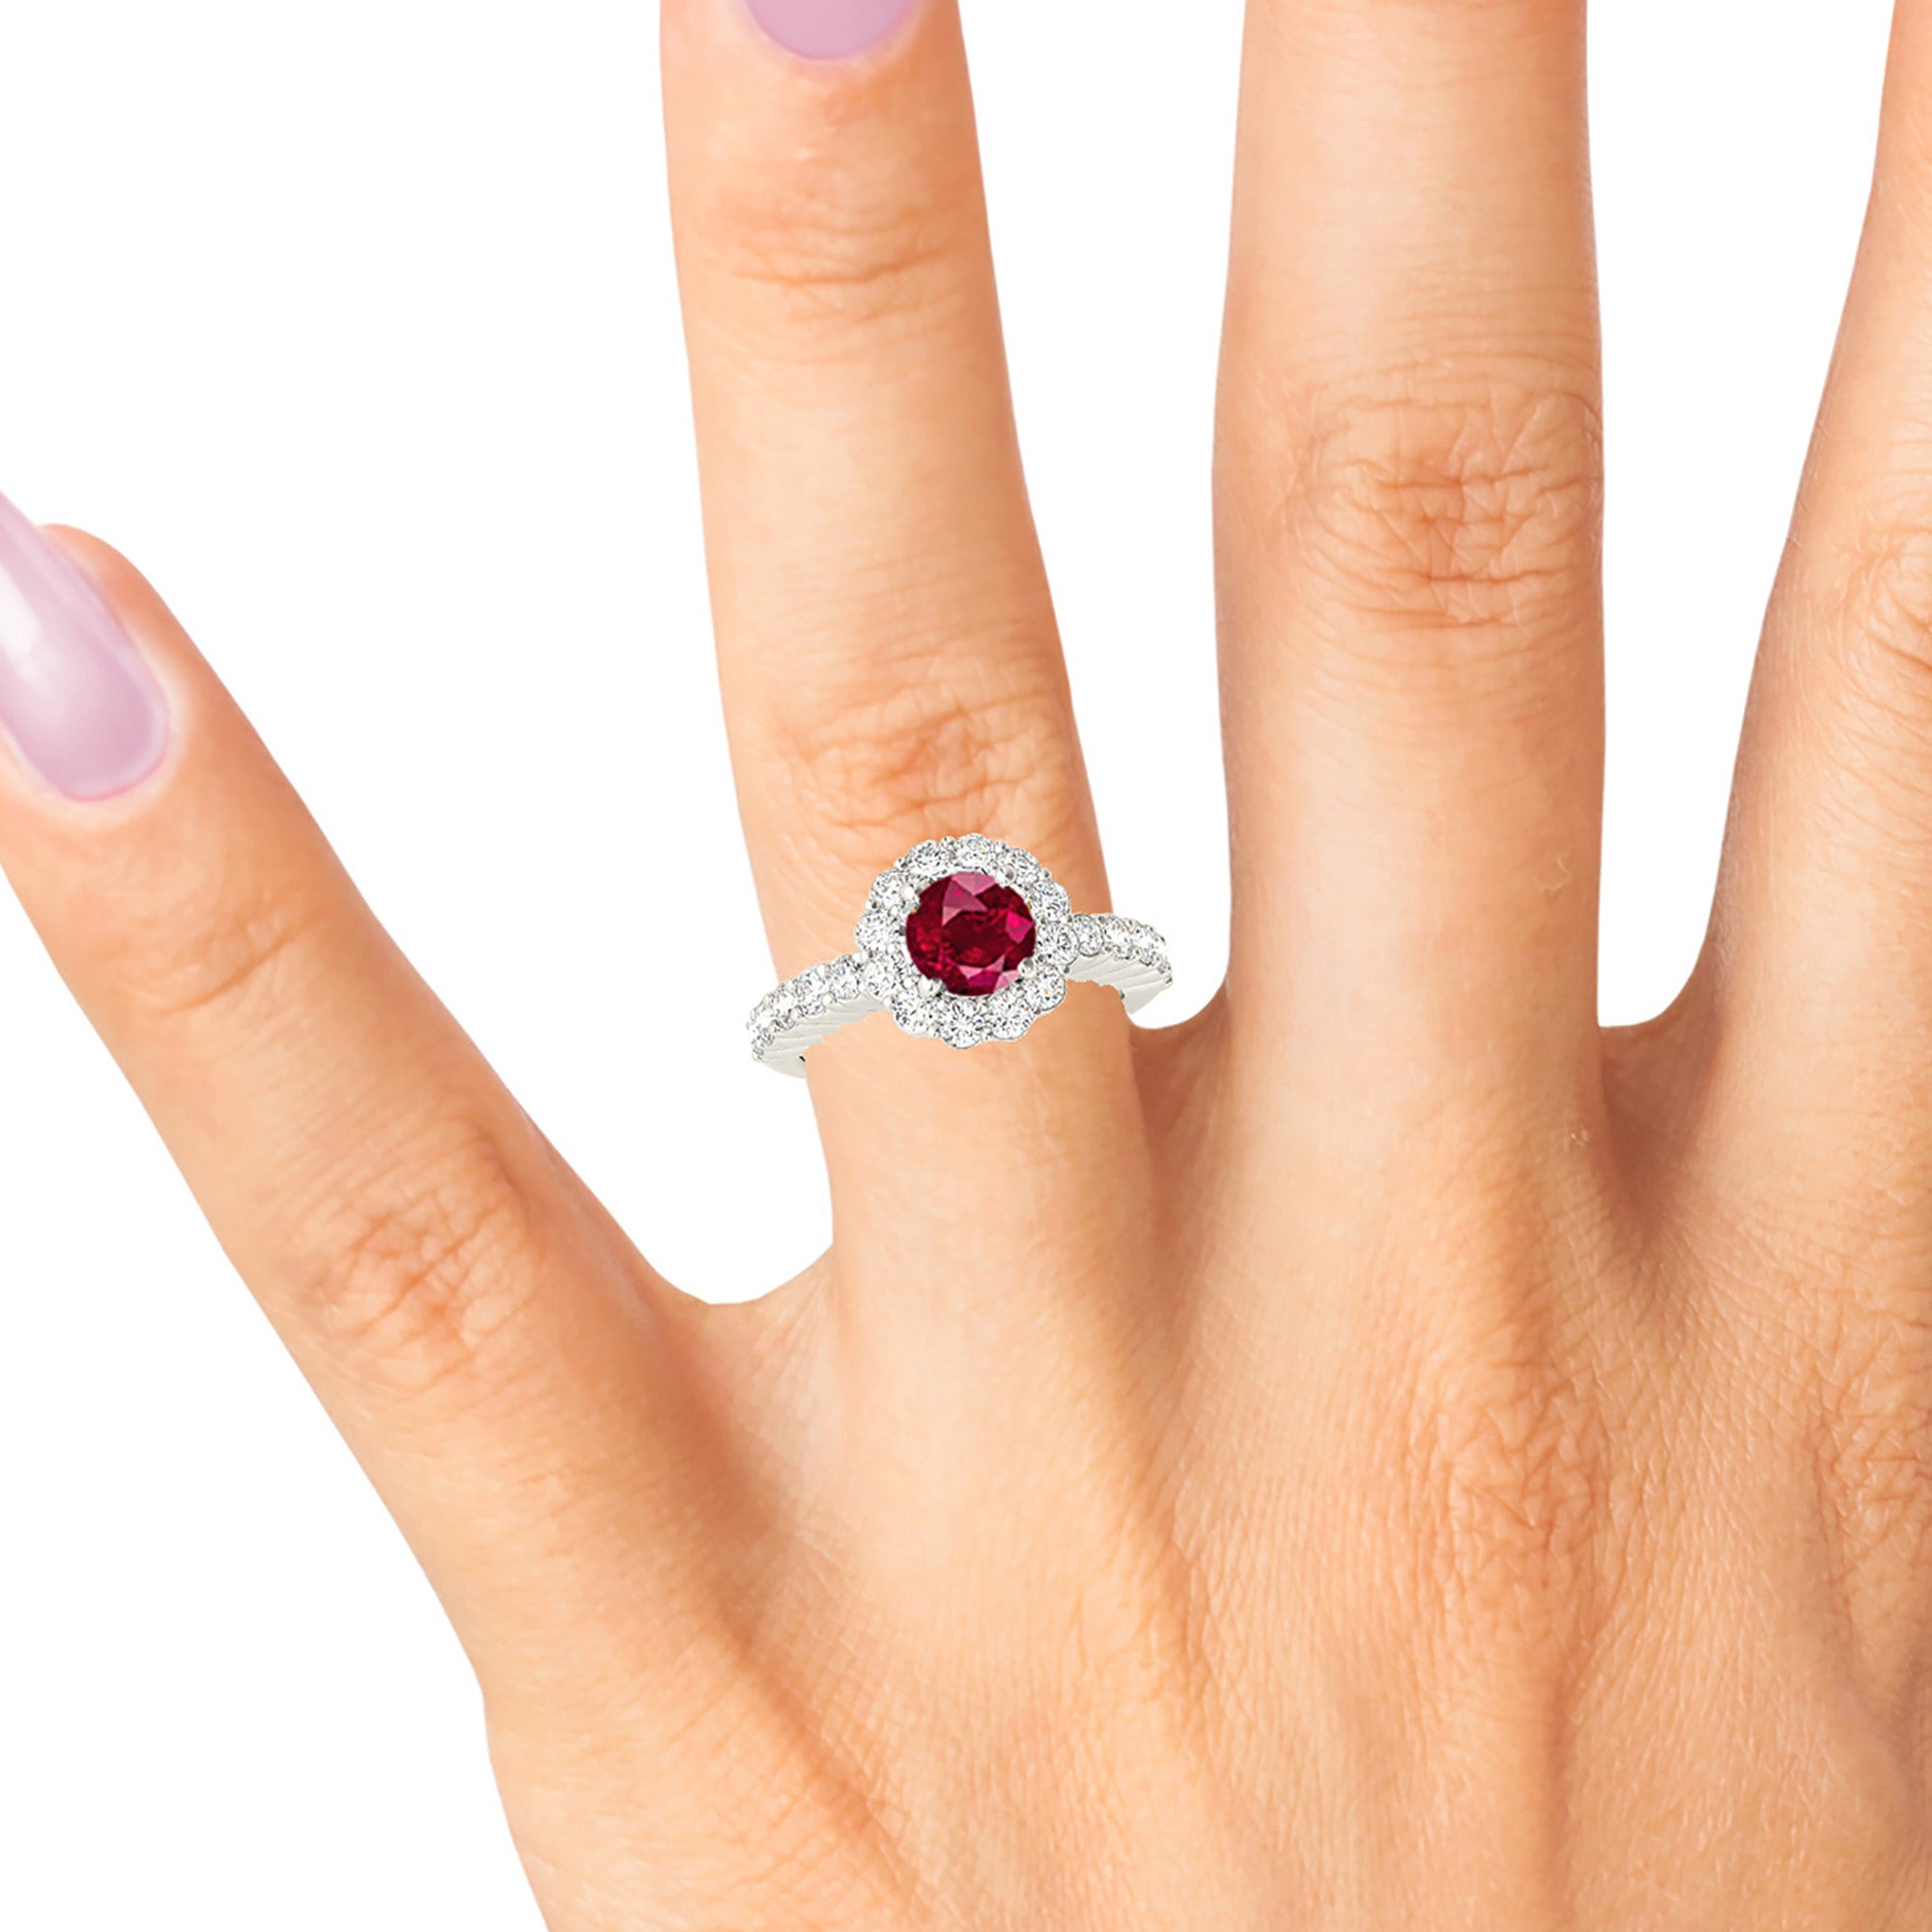 1.35 ct. Genuine Ruby Ring With 0.70 ctw. Diamond Floral Halo And Scalloped Diamond band-in 14K/18K White, Yellow, Rose Gold and Platinum - Christmas Jewelry Gift -VIRABYANI